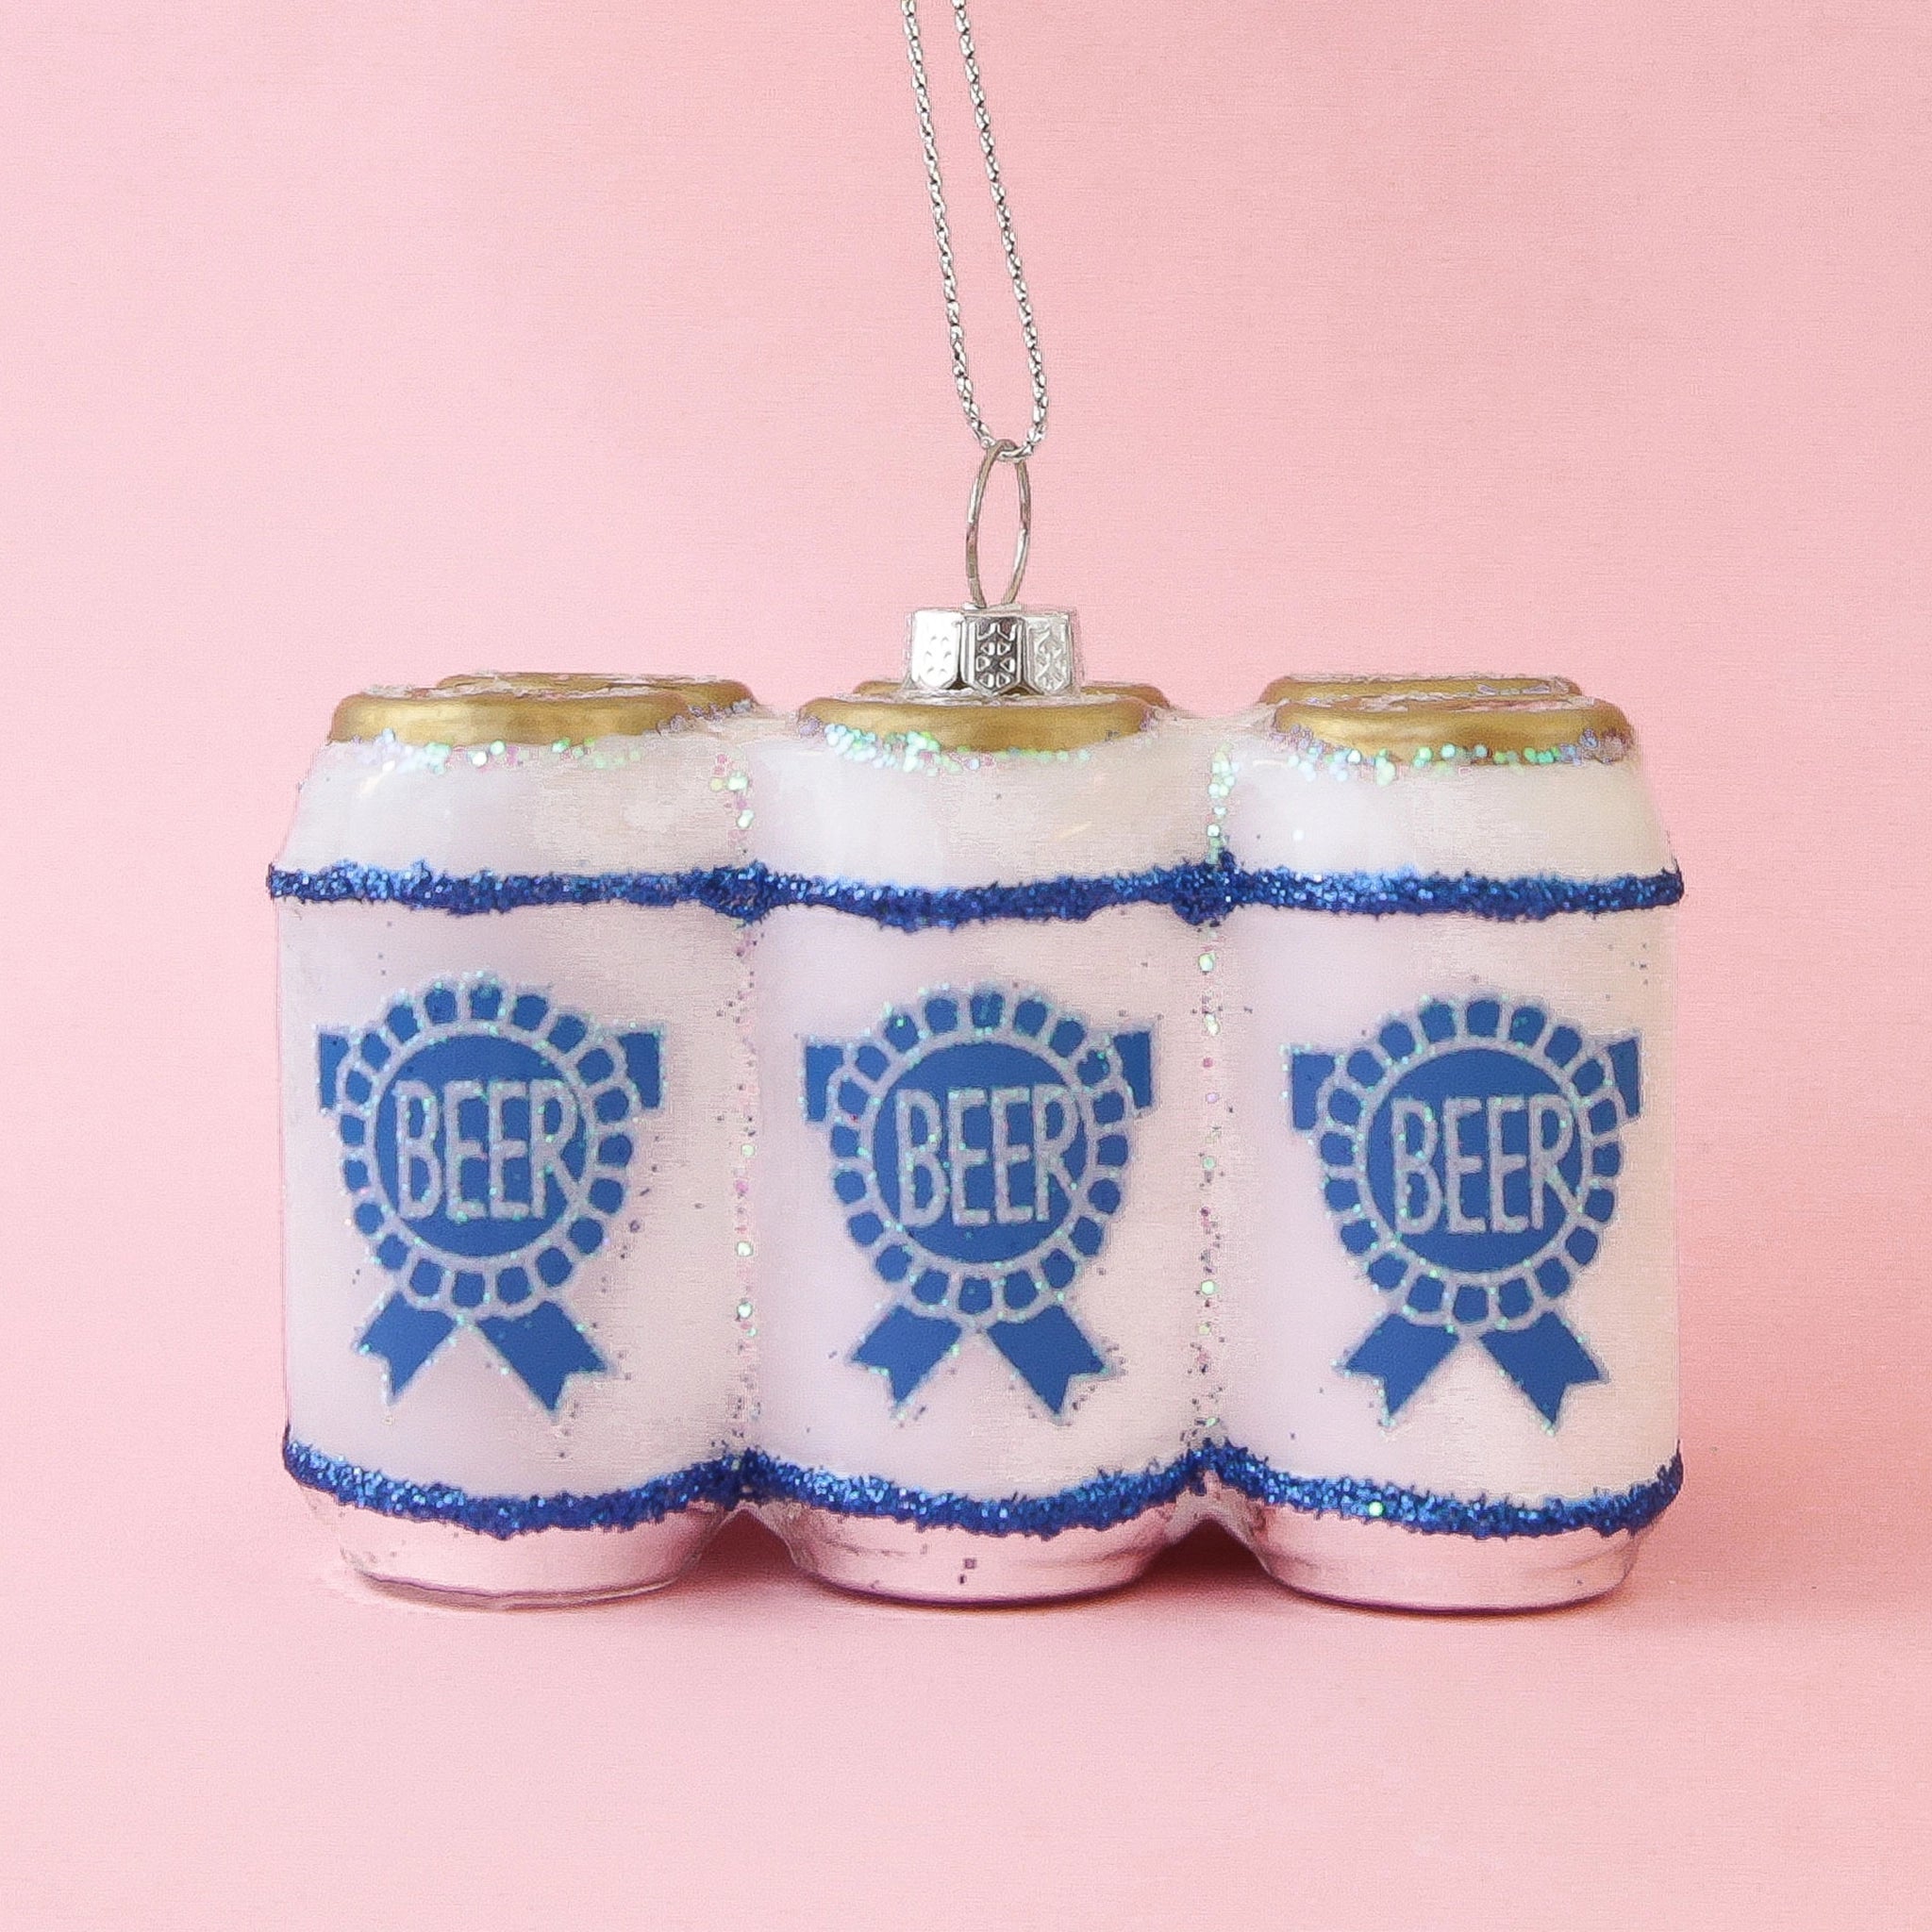 On a pink background is a glass ornament in the shape of a six pack of beer with a blue label on the front and silver glitter detailing. 